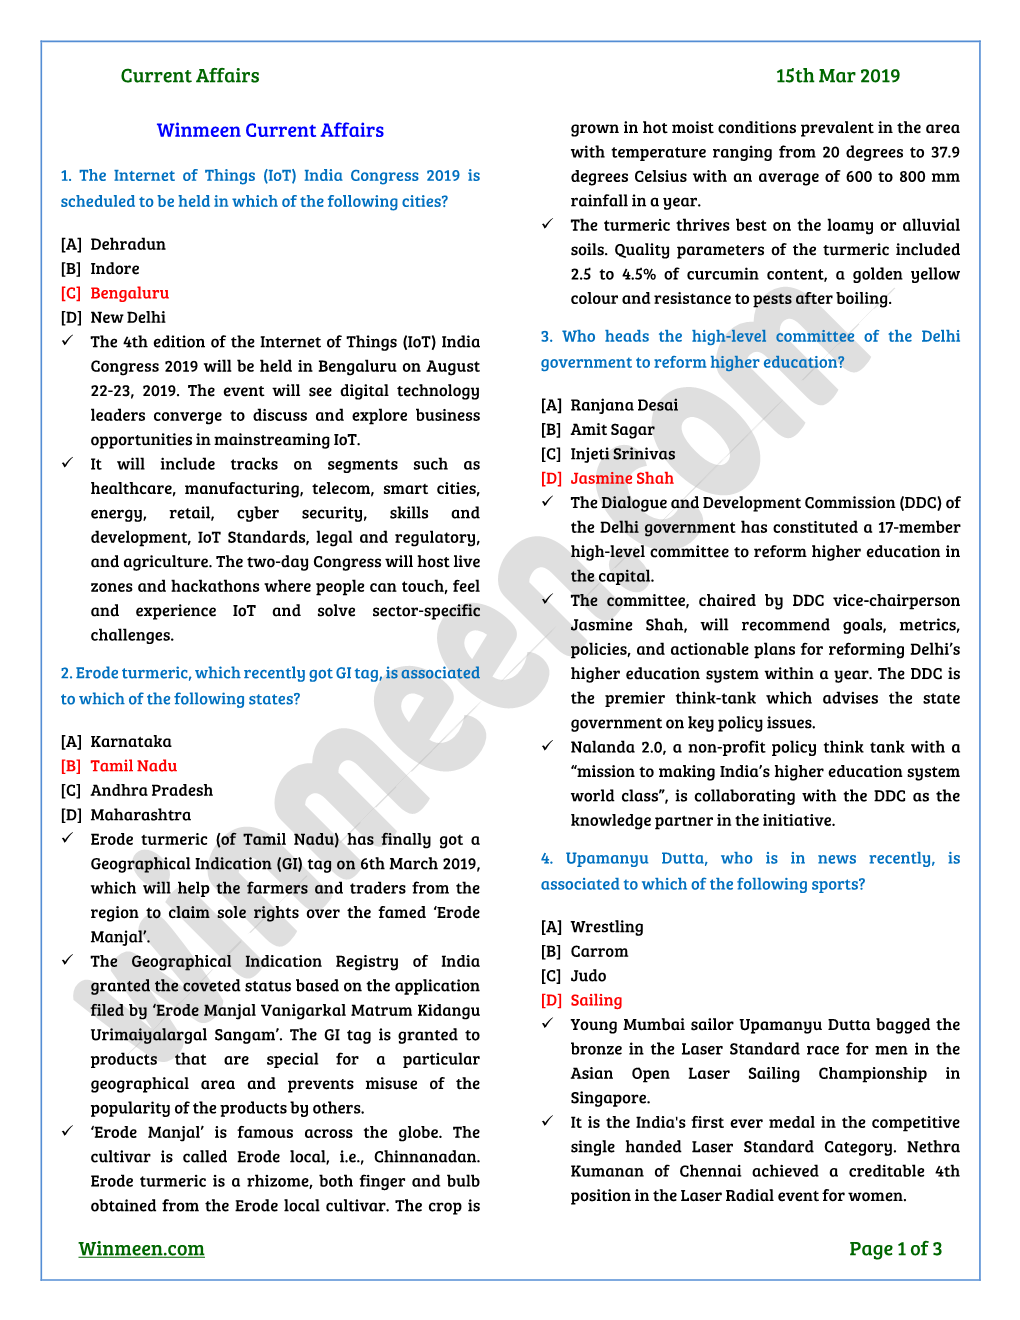 Current Affairs 15Th Mar 2019 Winmeen.Com Page 1 of 3